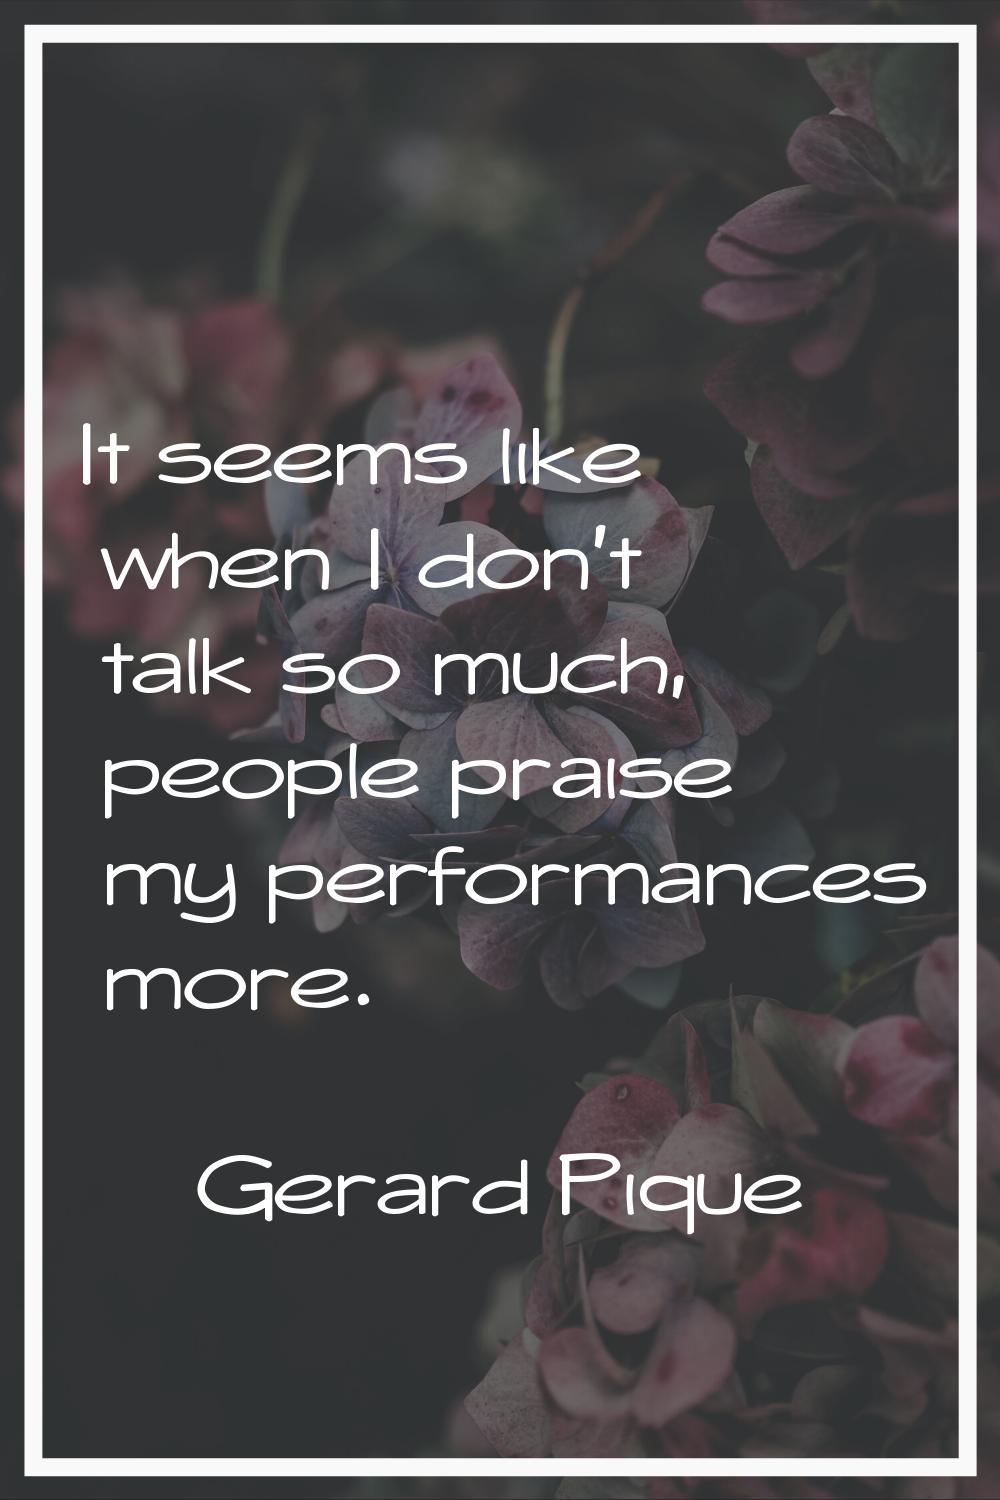 It seems like when I don't talk so much, people praise my performances more.